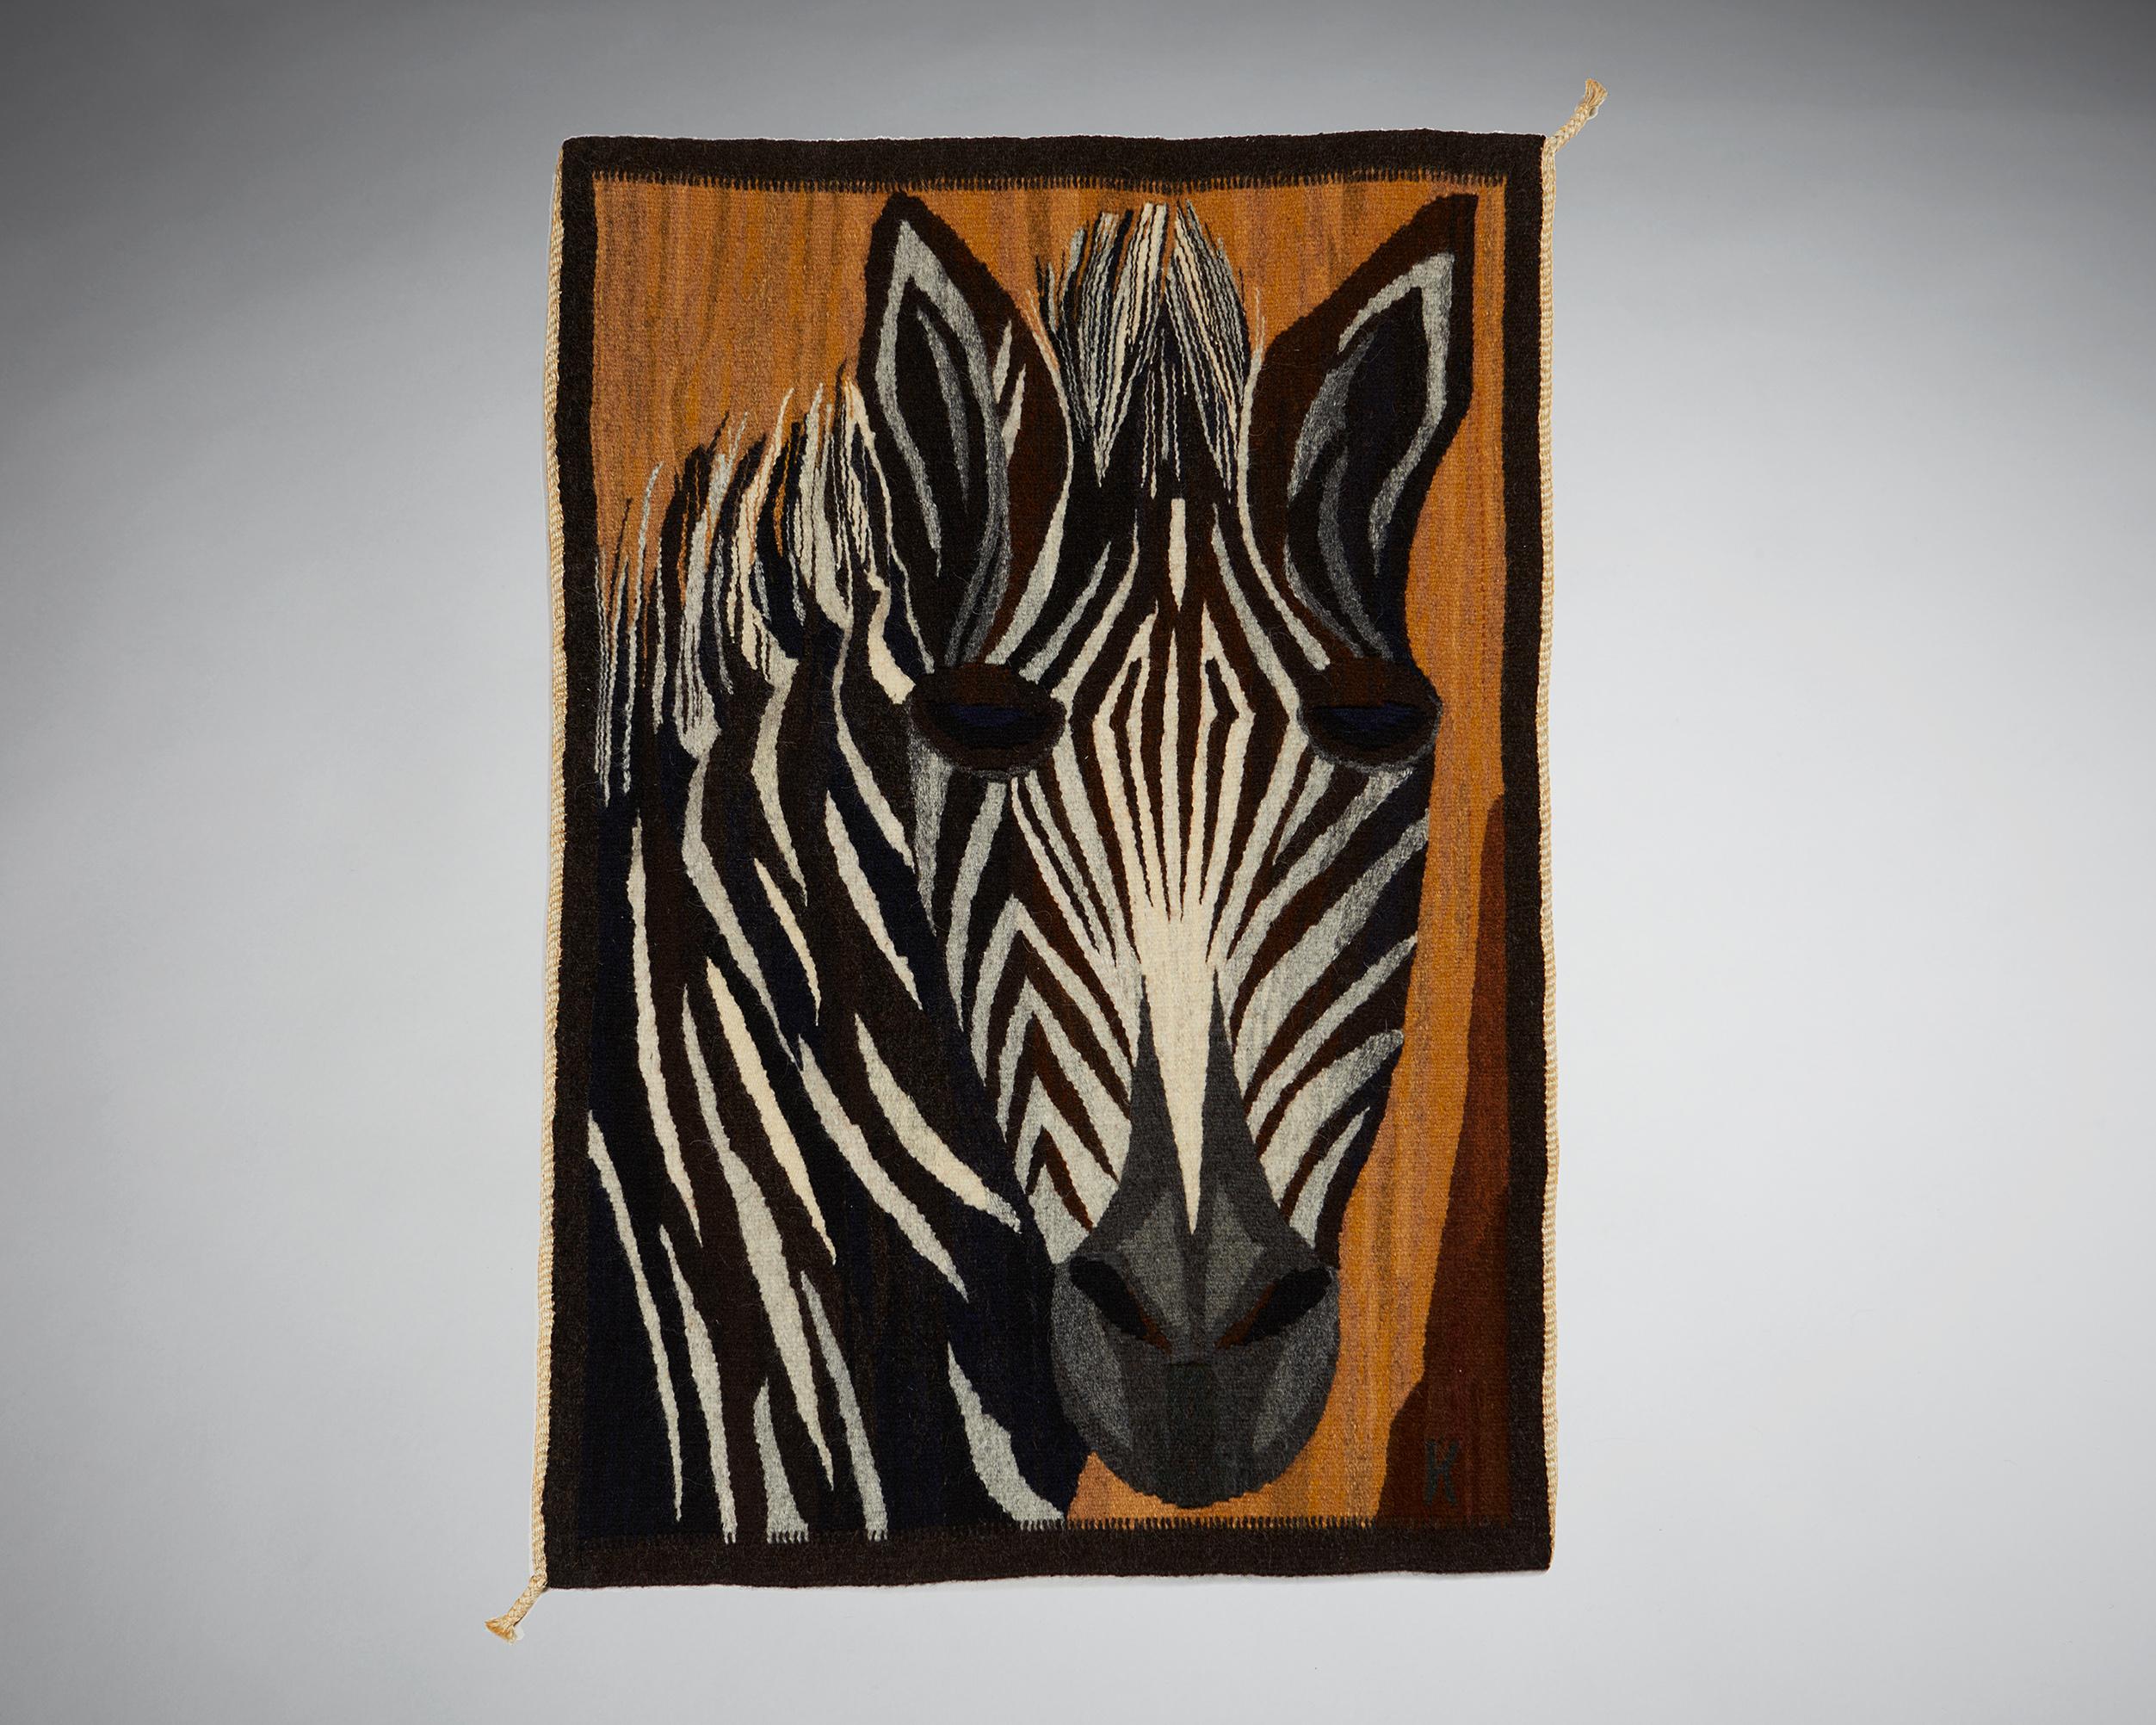 Tapestry ‘Zebra’ attributed to Kerstin Bäckman,
Sweden. 1970s.
Hand woven.

Signed.

H: 73 cm / 2' 4 3/4